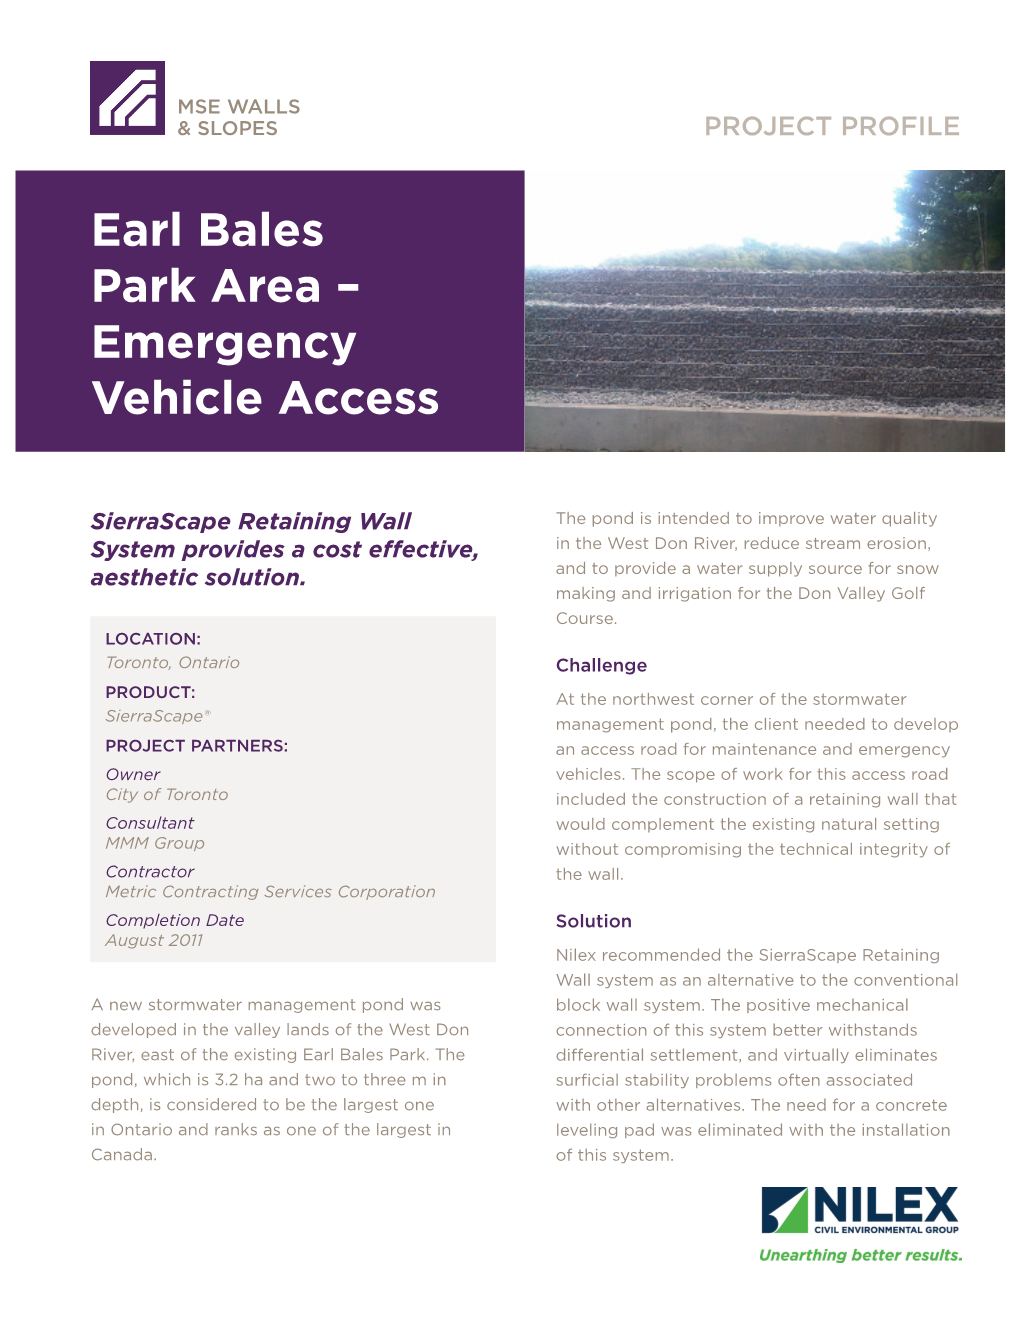 Earl Bales Park Area – Emergency Vehicle Access